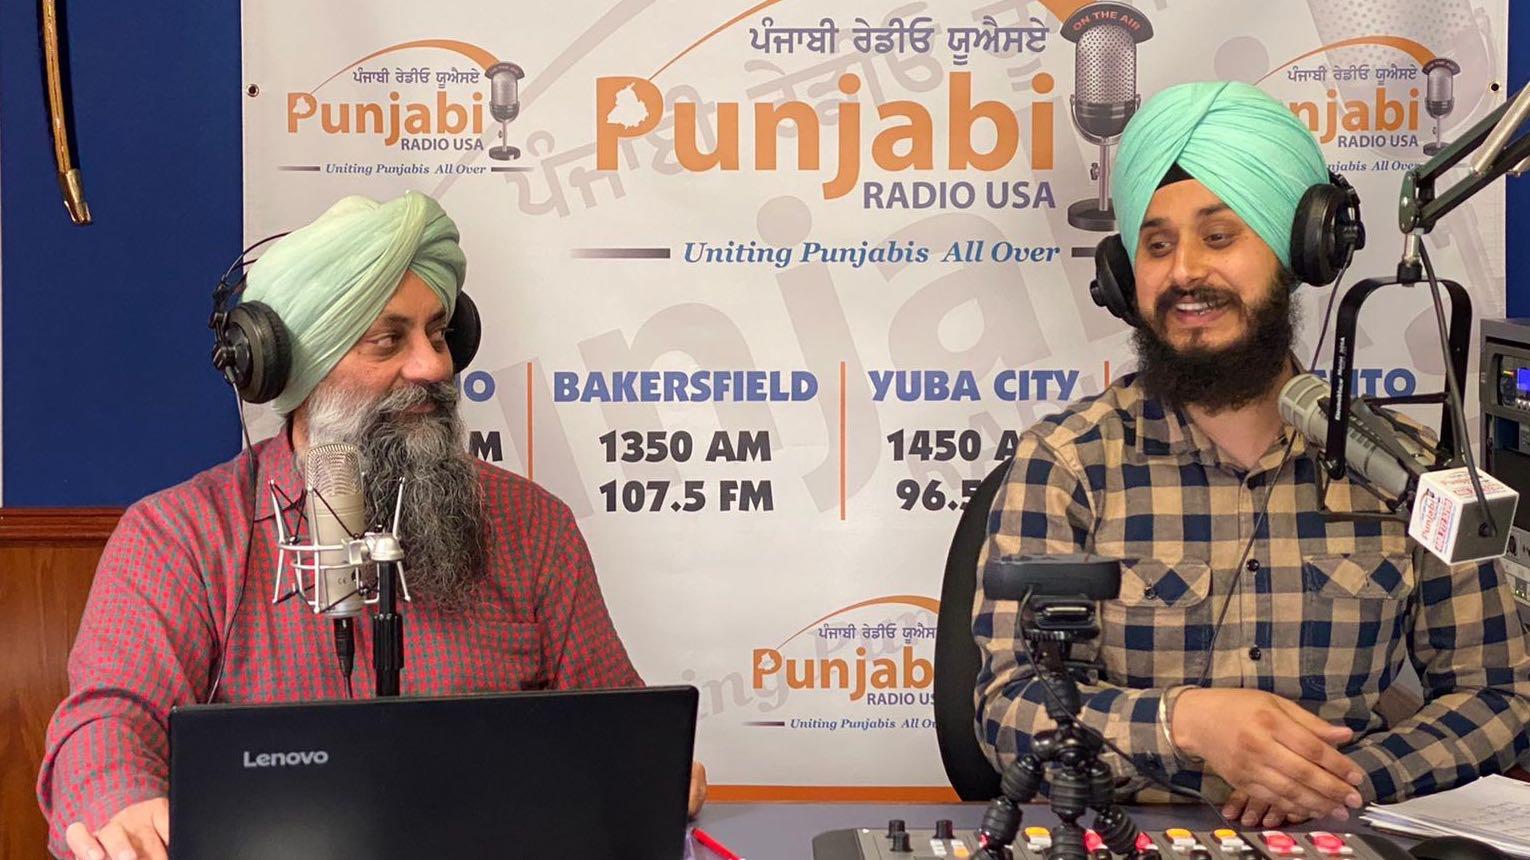 Harjot Singh Khalsa (left) and Rajkaranbir Singh are hosts of Punjabi Radio USA, which provides valuable information to immigrant workers.